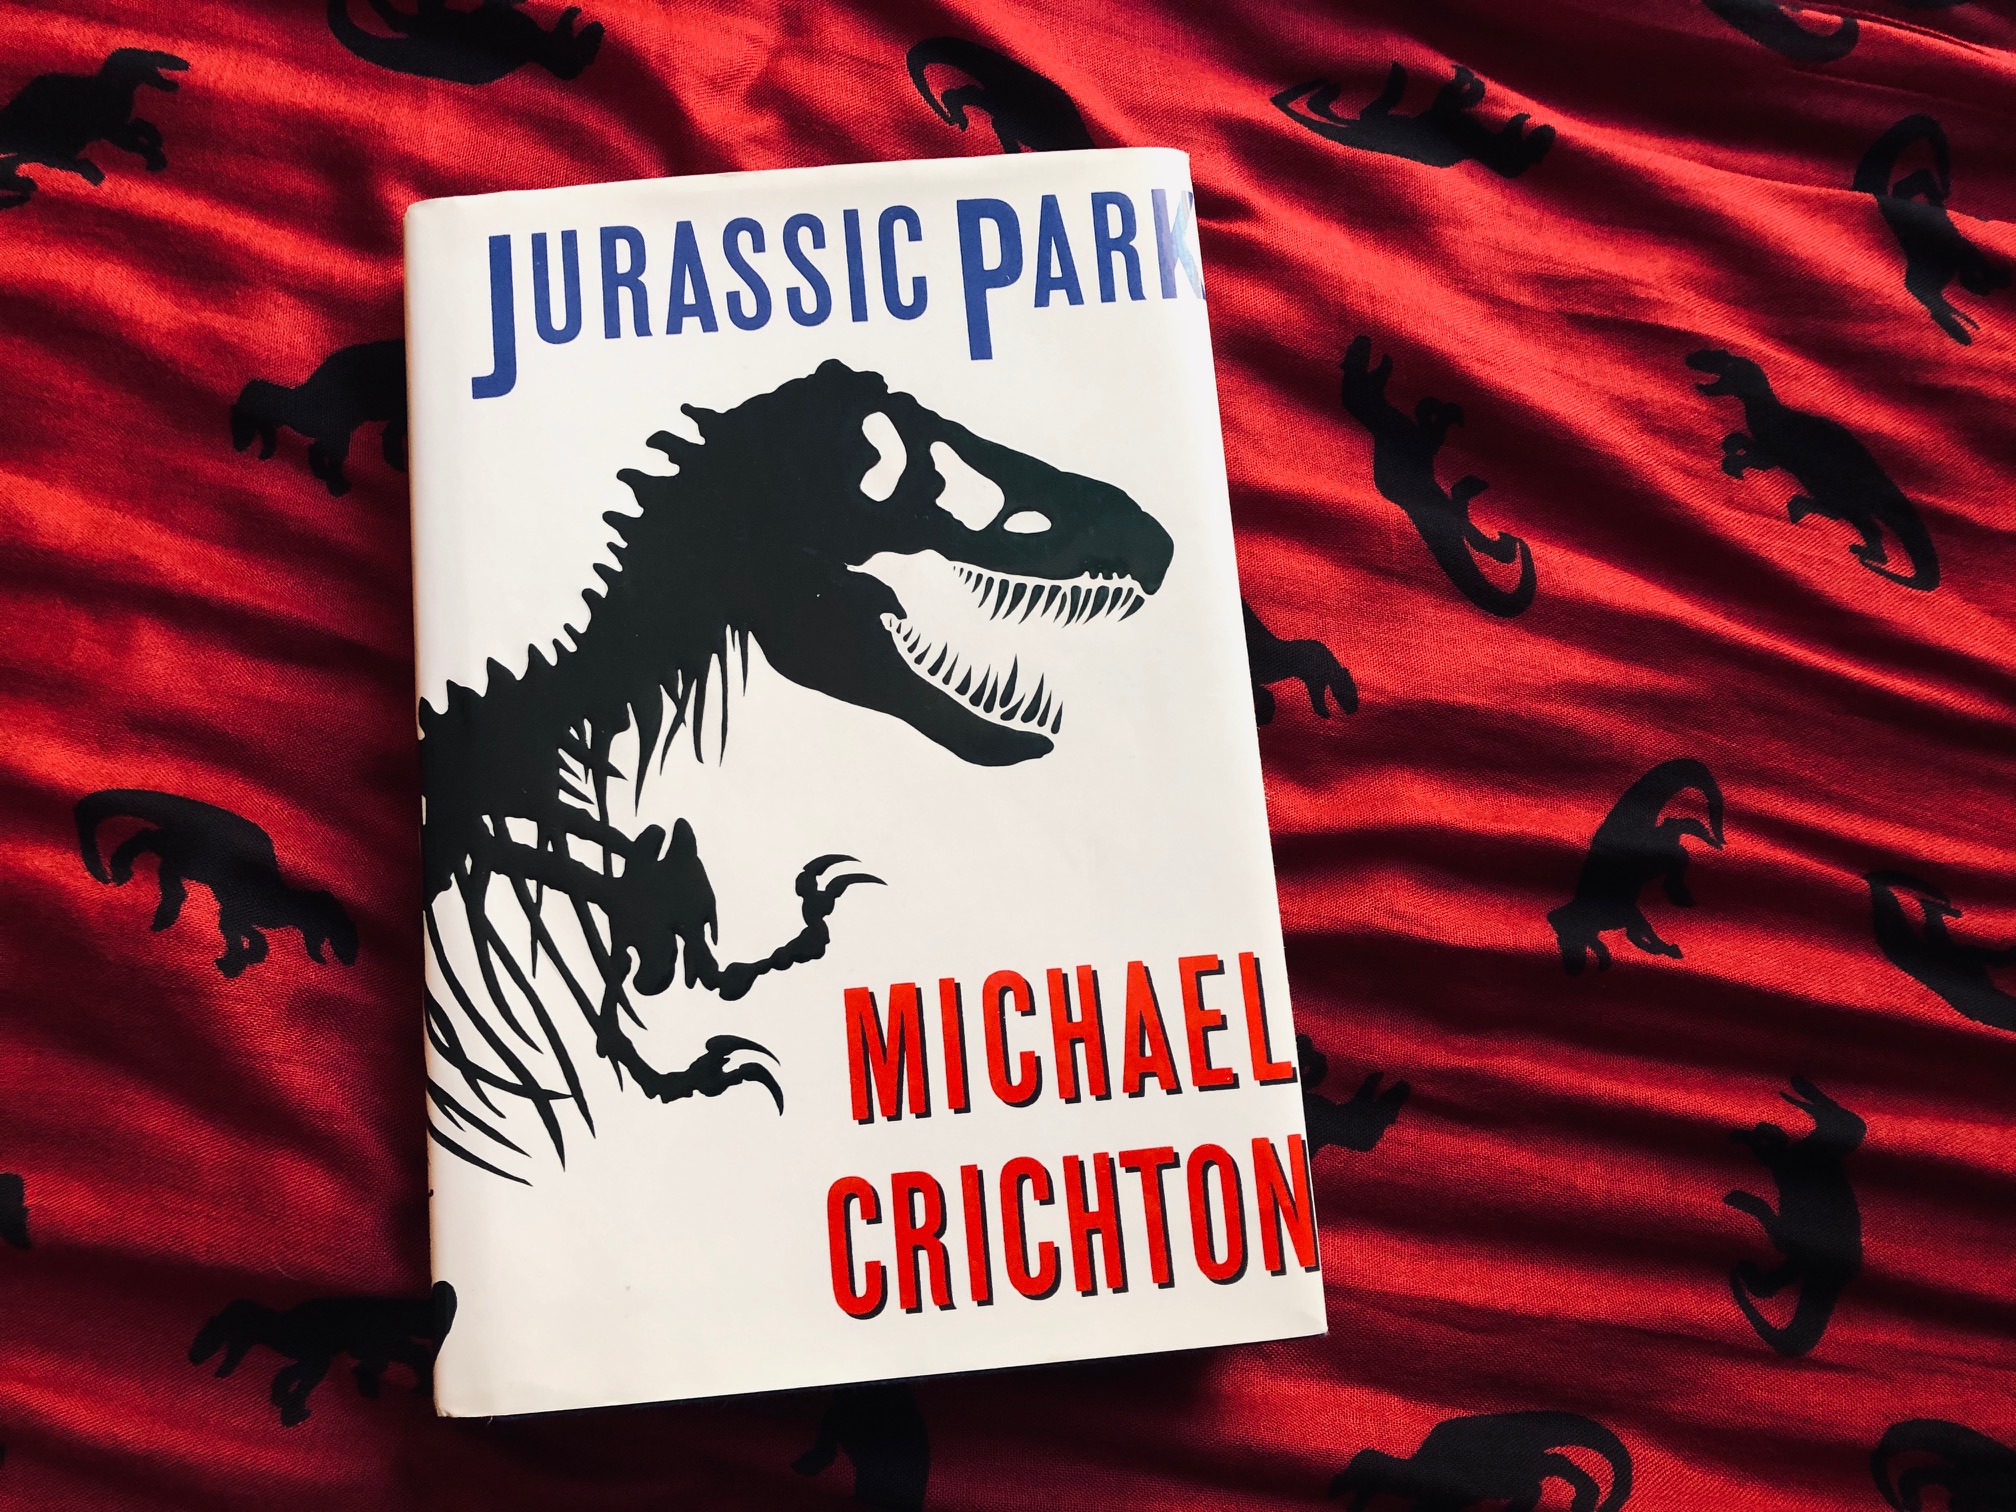 book review jurassic park